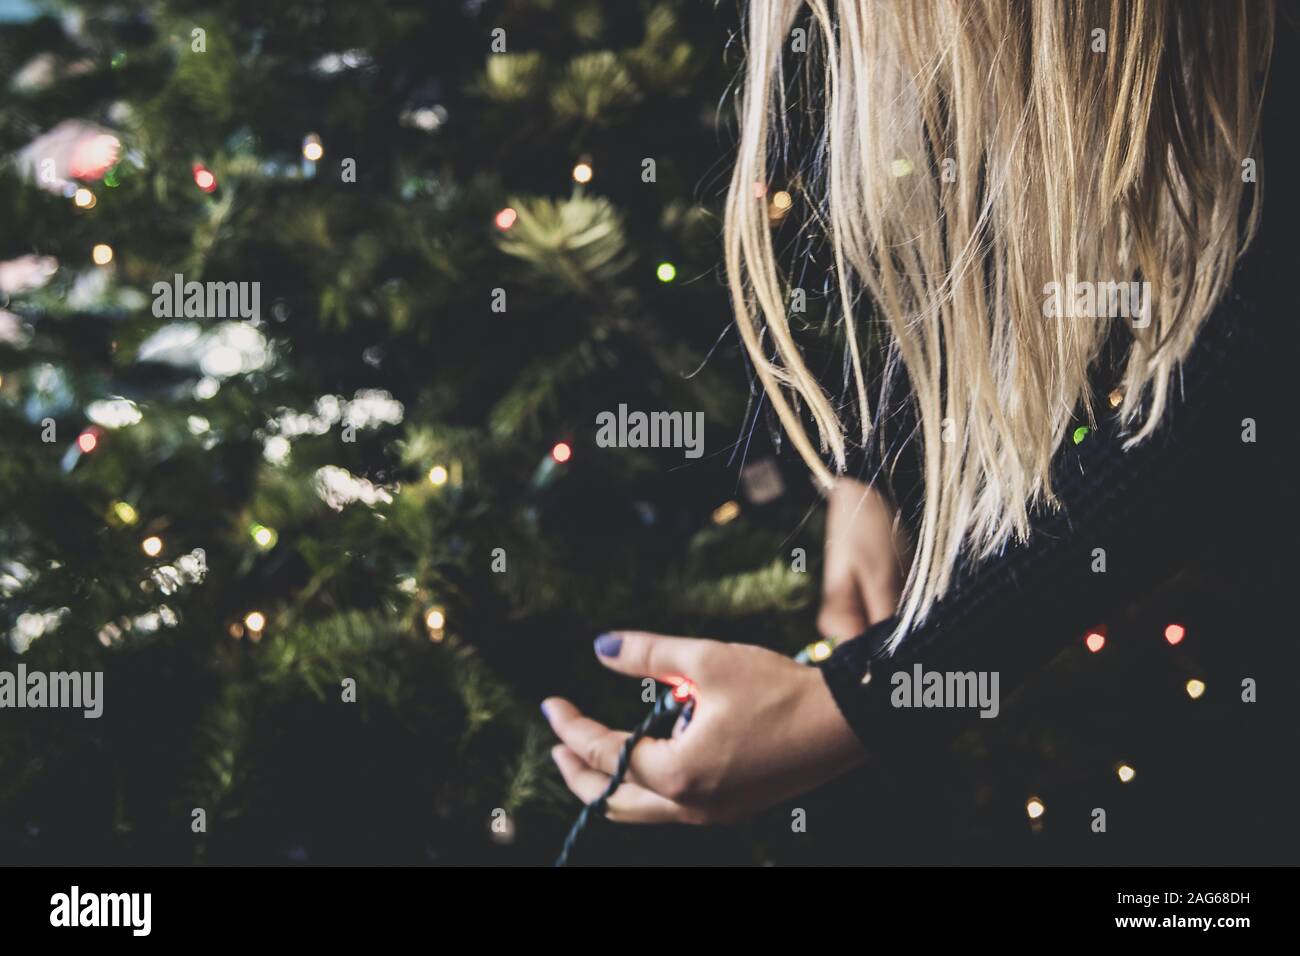 Blonde female with black sweater decorating the Christmas tree with string lights Stock Photo